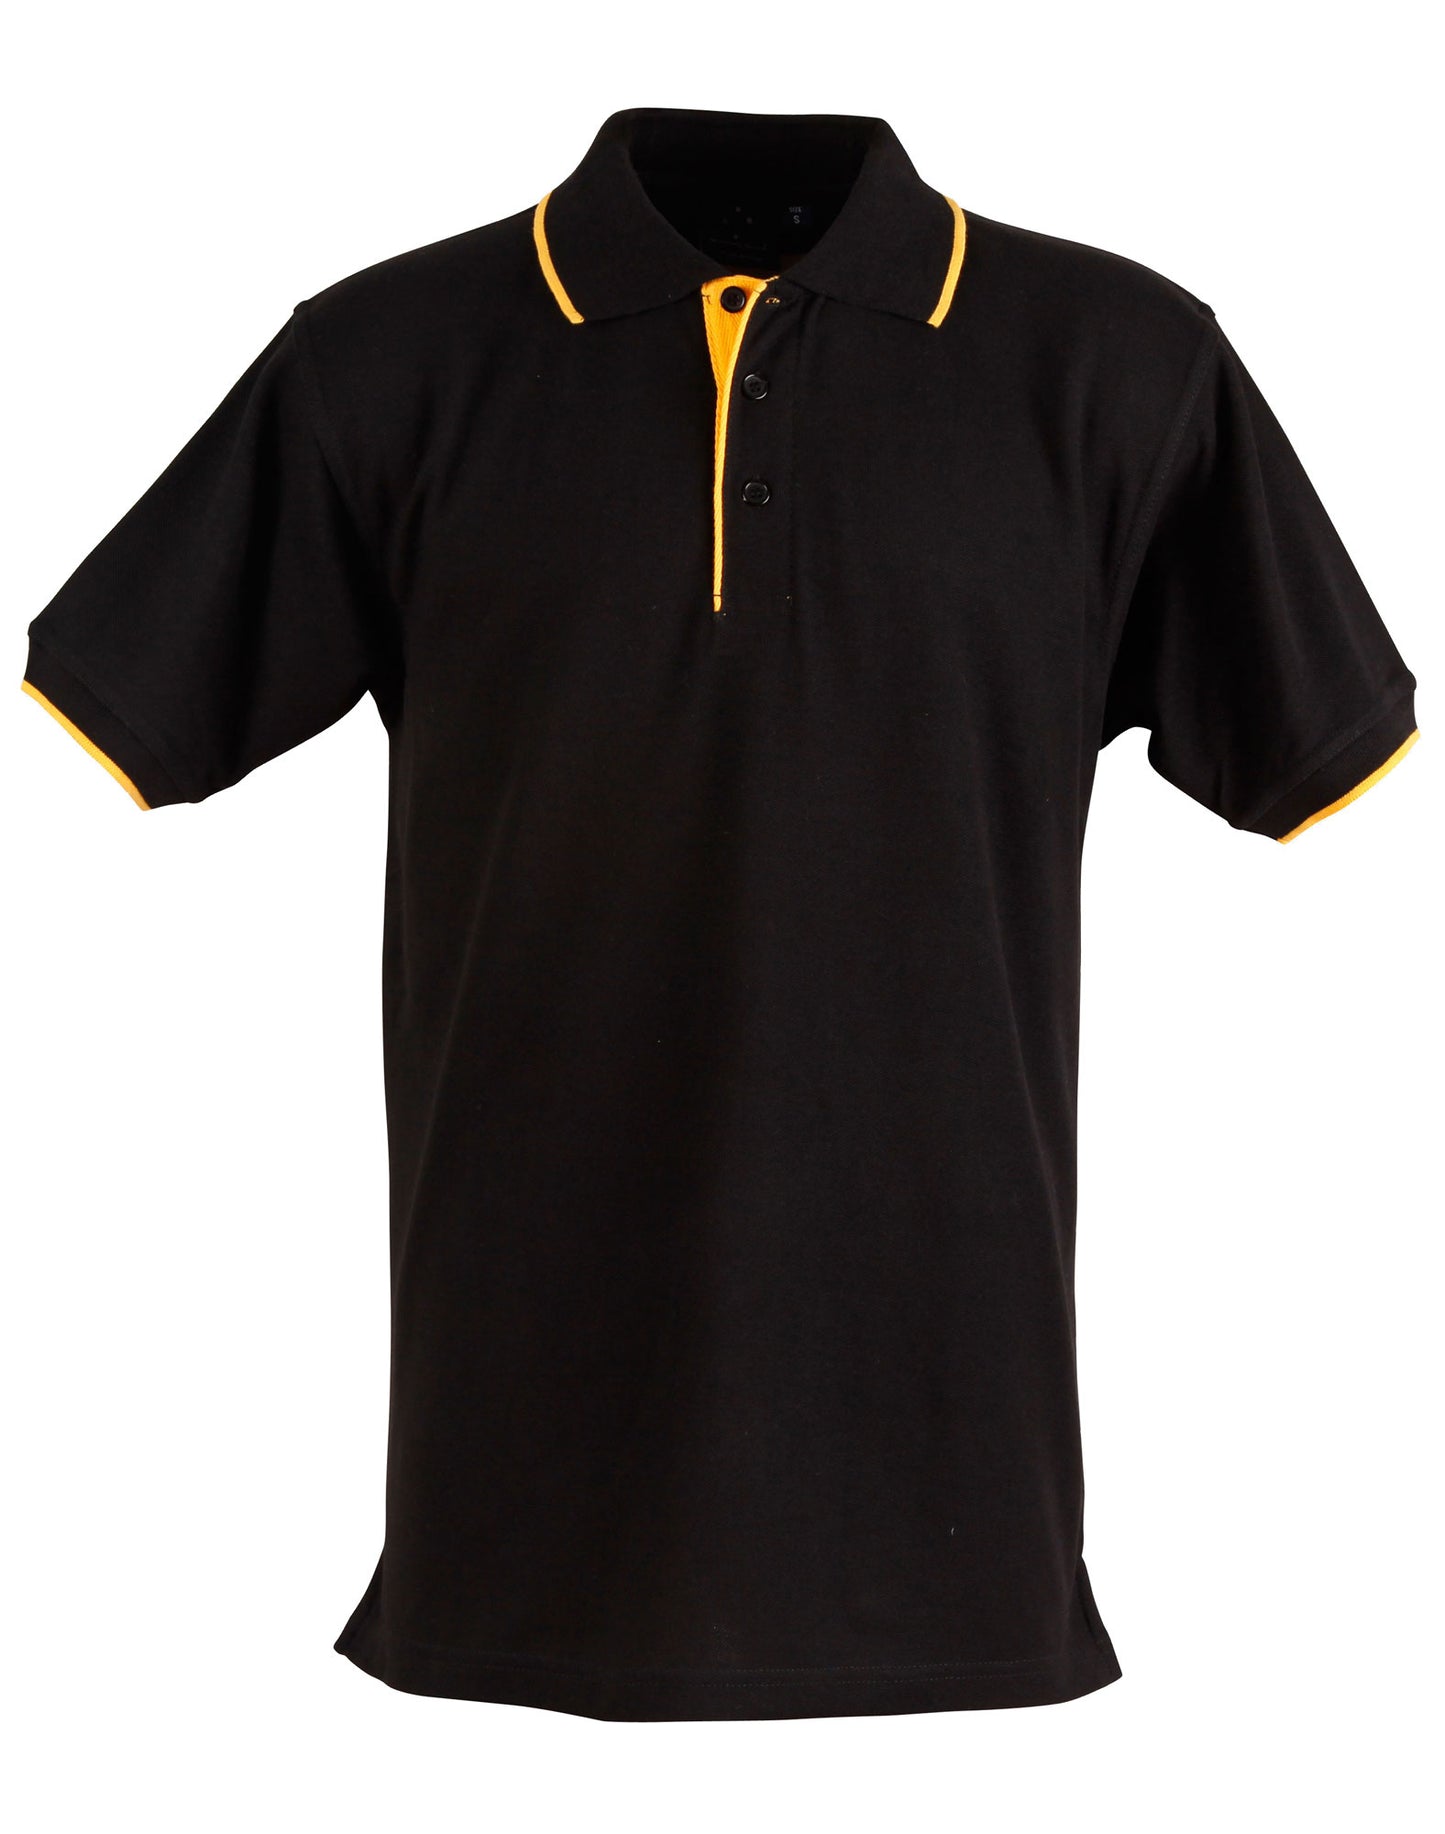 Pique Contract Short Sleeve Polo Shirt - made by AIW